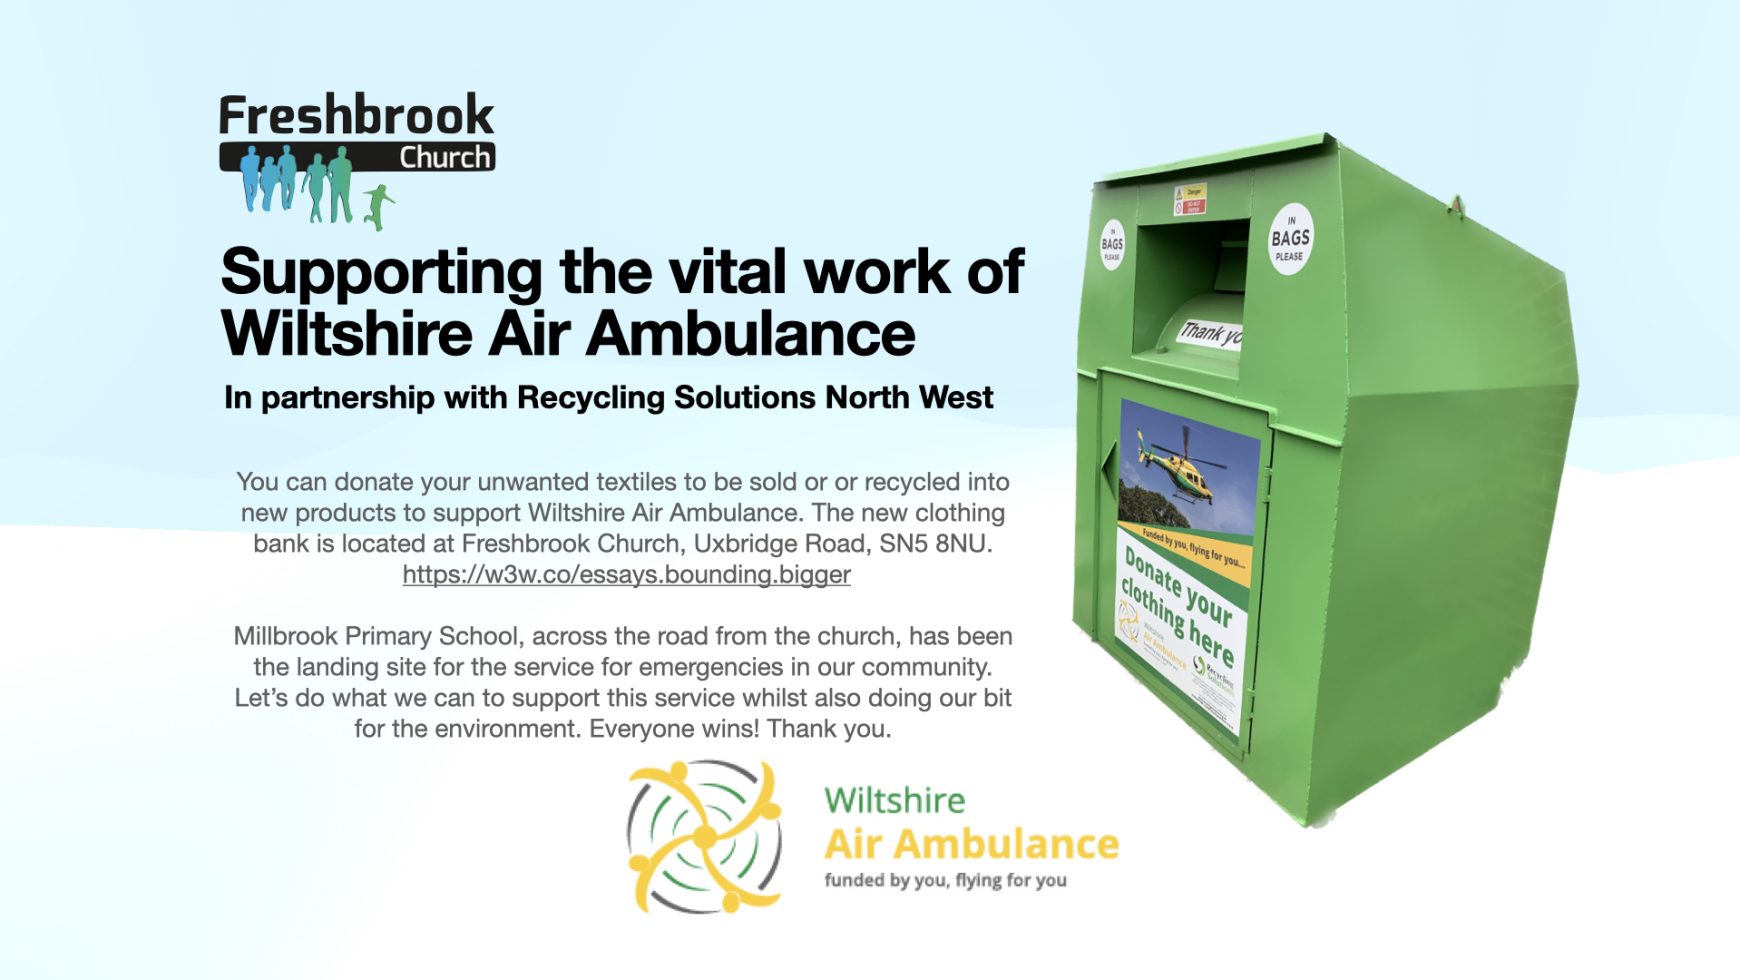 New Clothing Bank for Wiltshire Air Ambulance